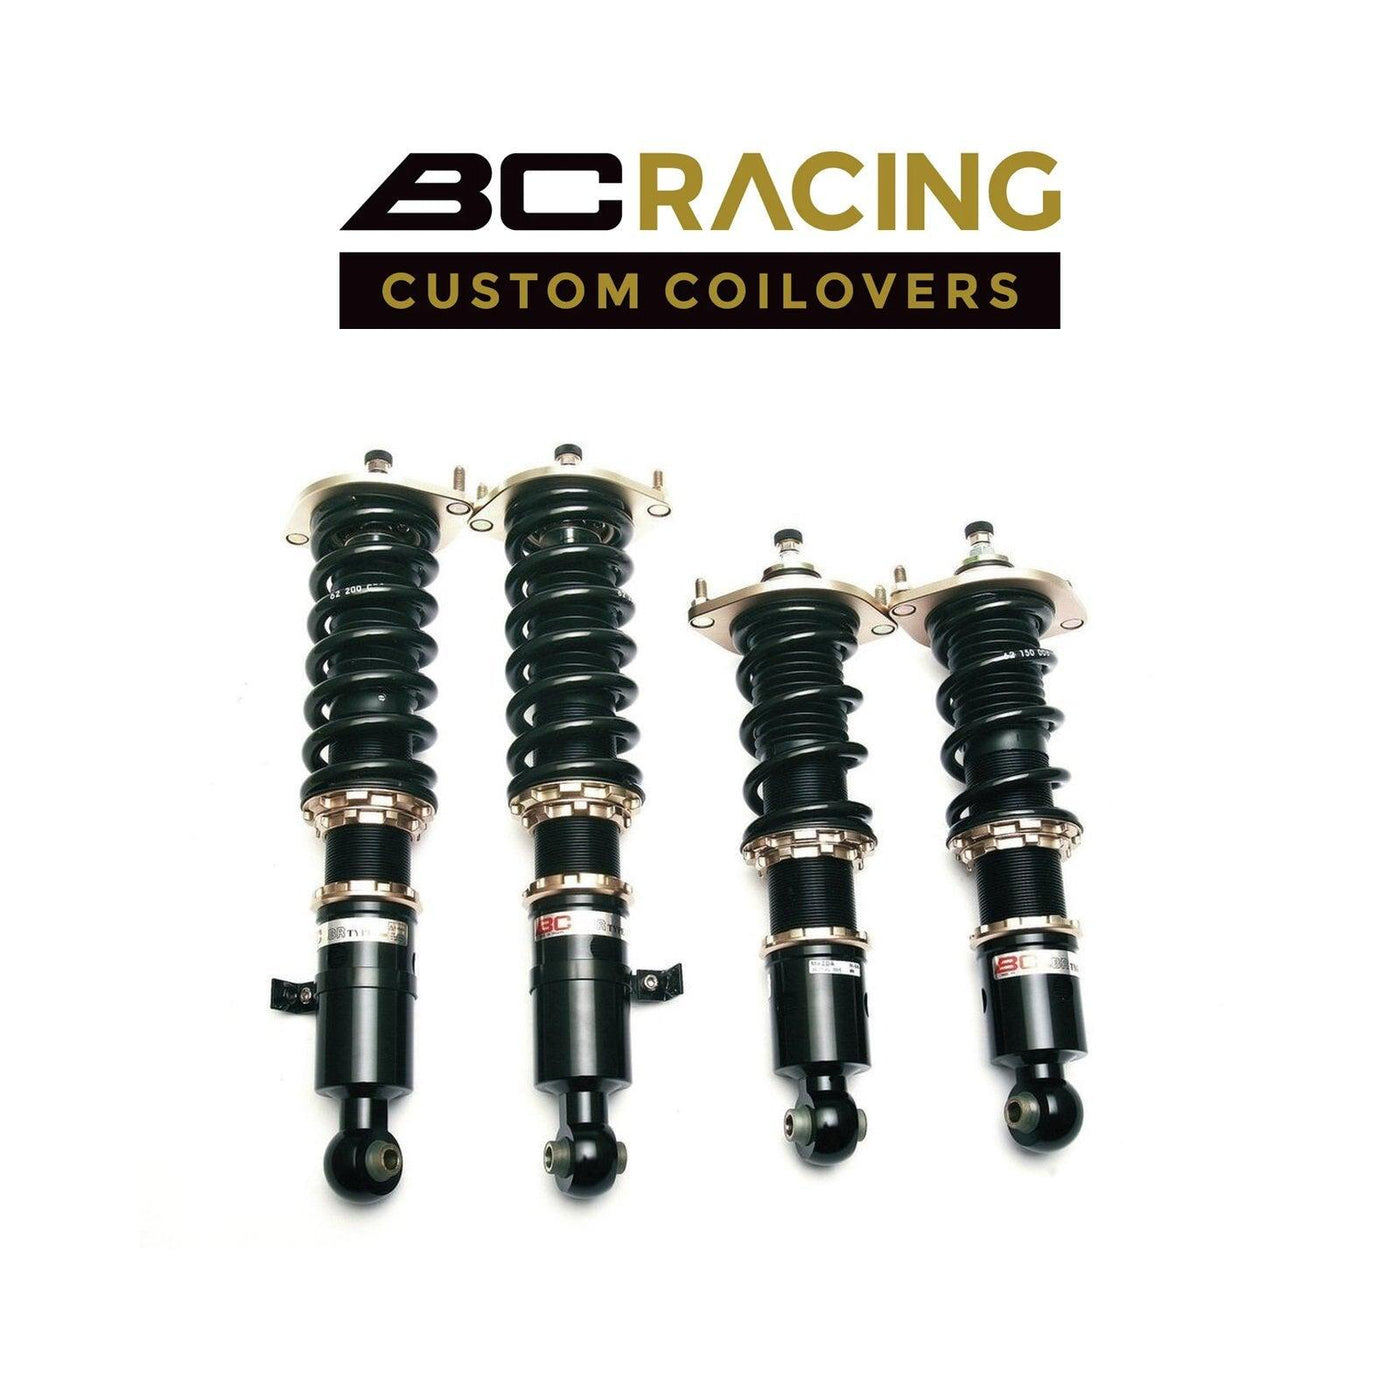 BC Racing Coilovers 2009-2016 AUDI A4 FWD/AWD - Attacking the Clock Racing